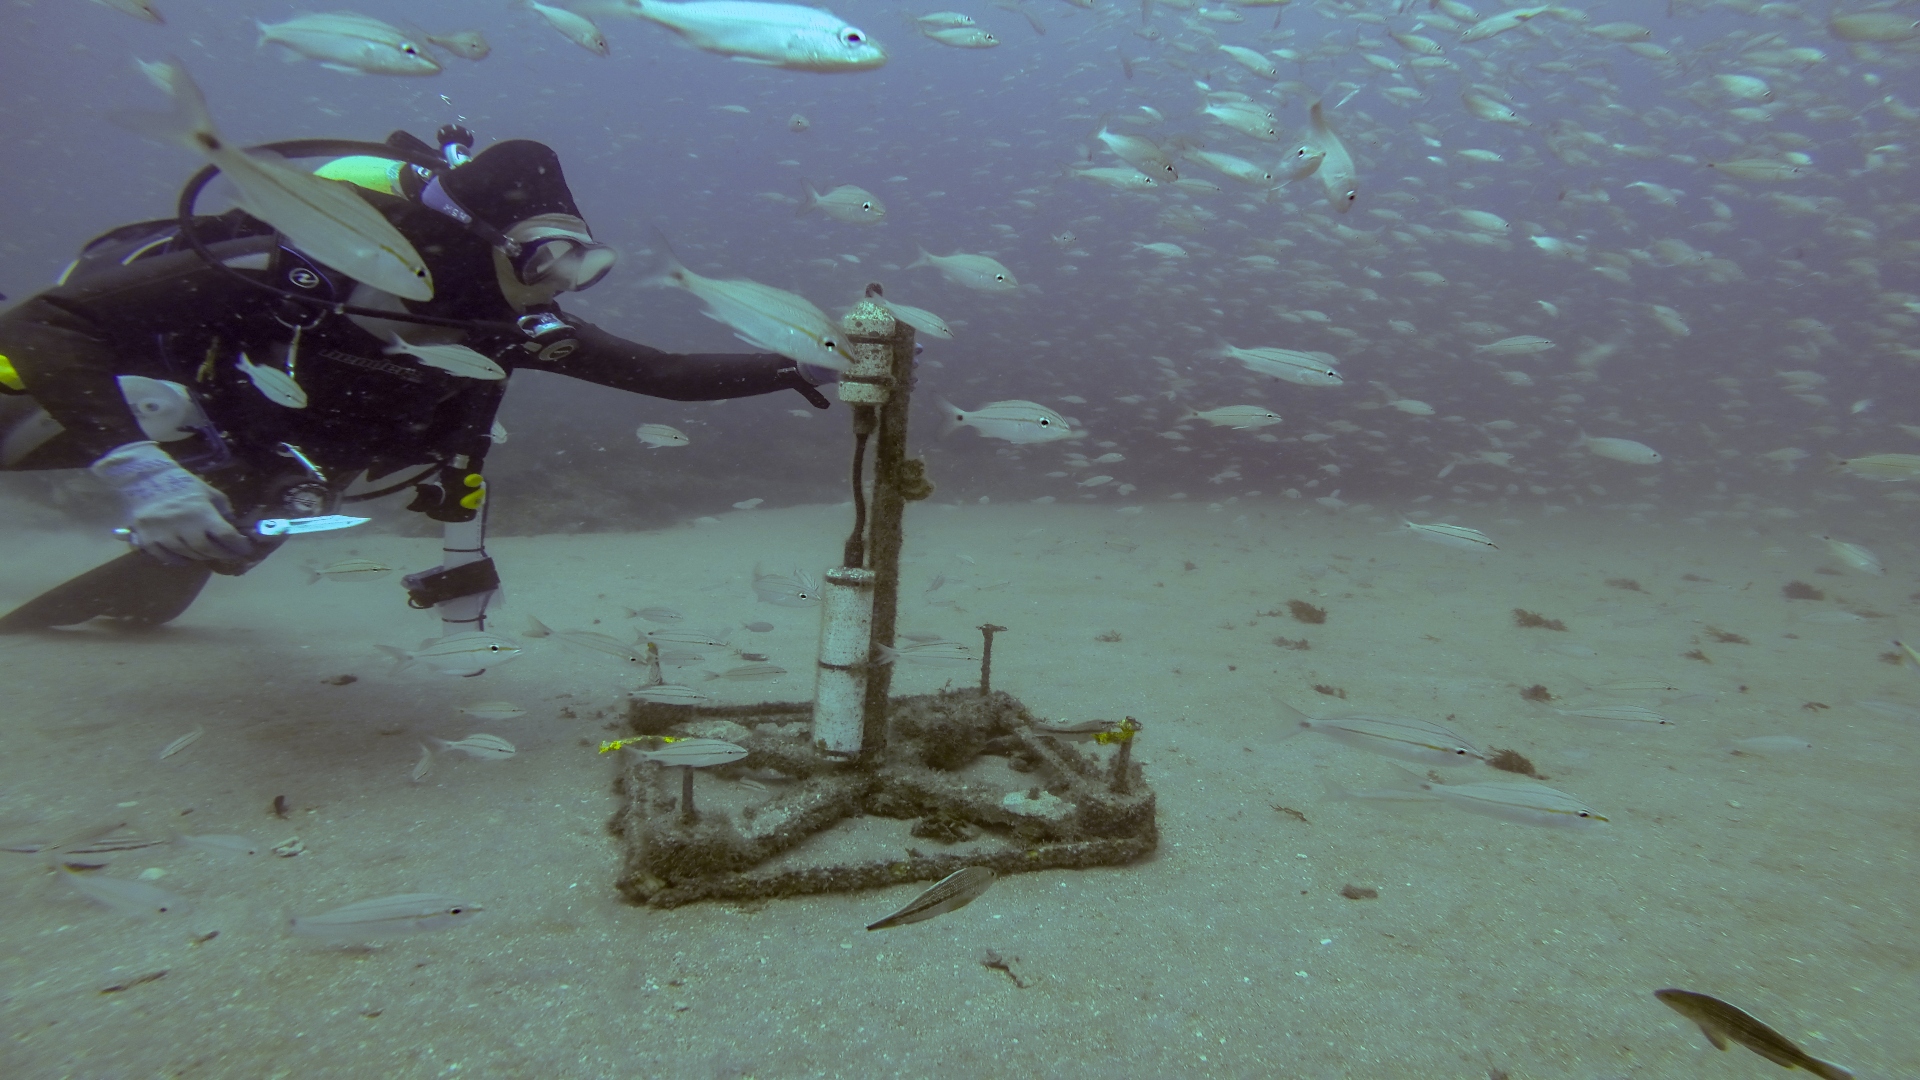 A scuba diver reaches and touches a scientific instrument while diving on a sandy seafloor.